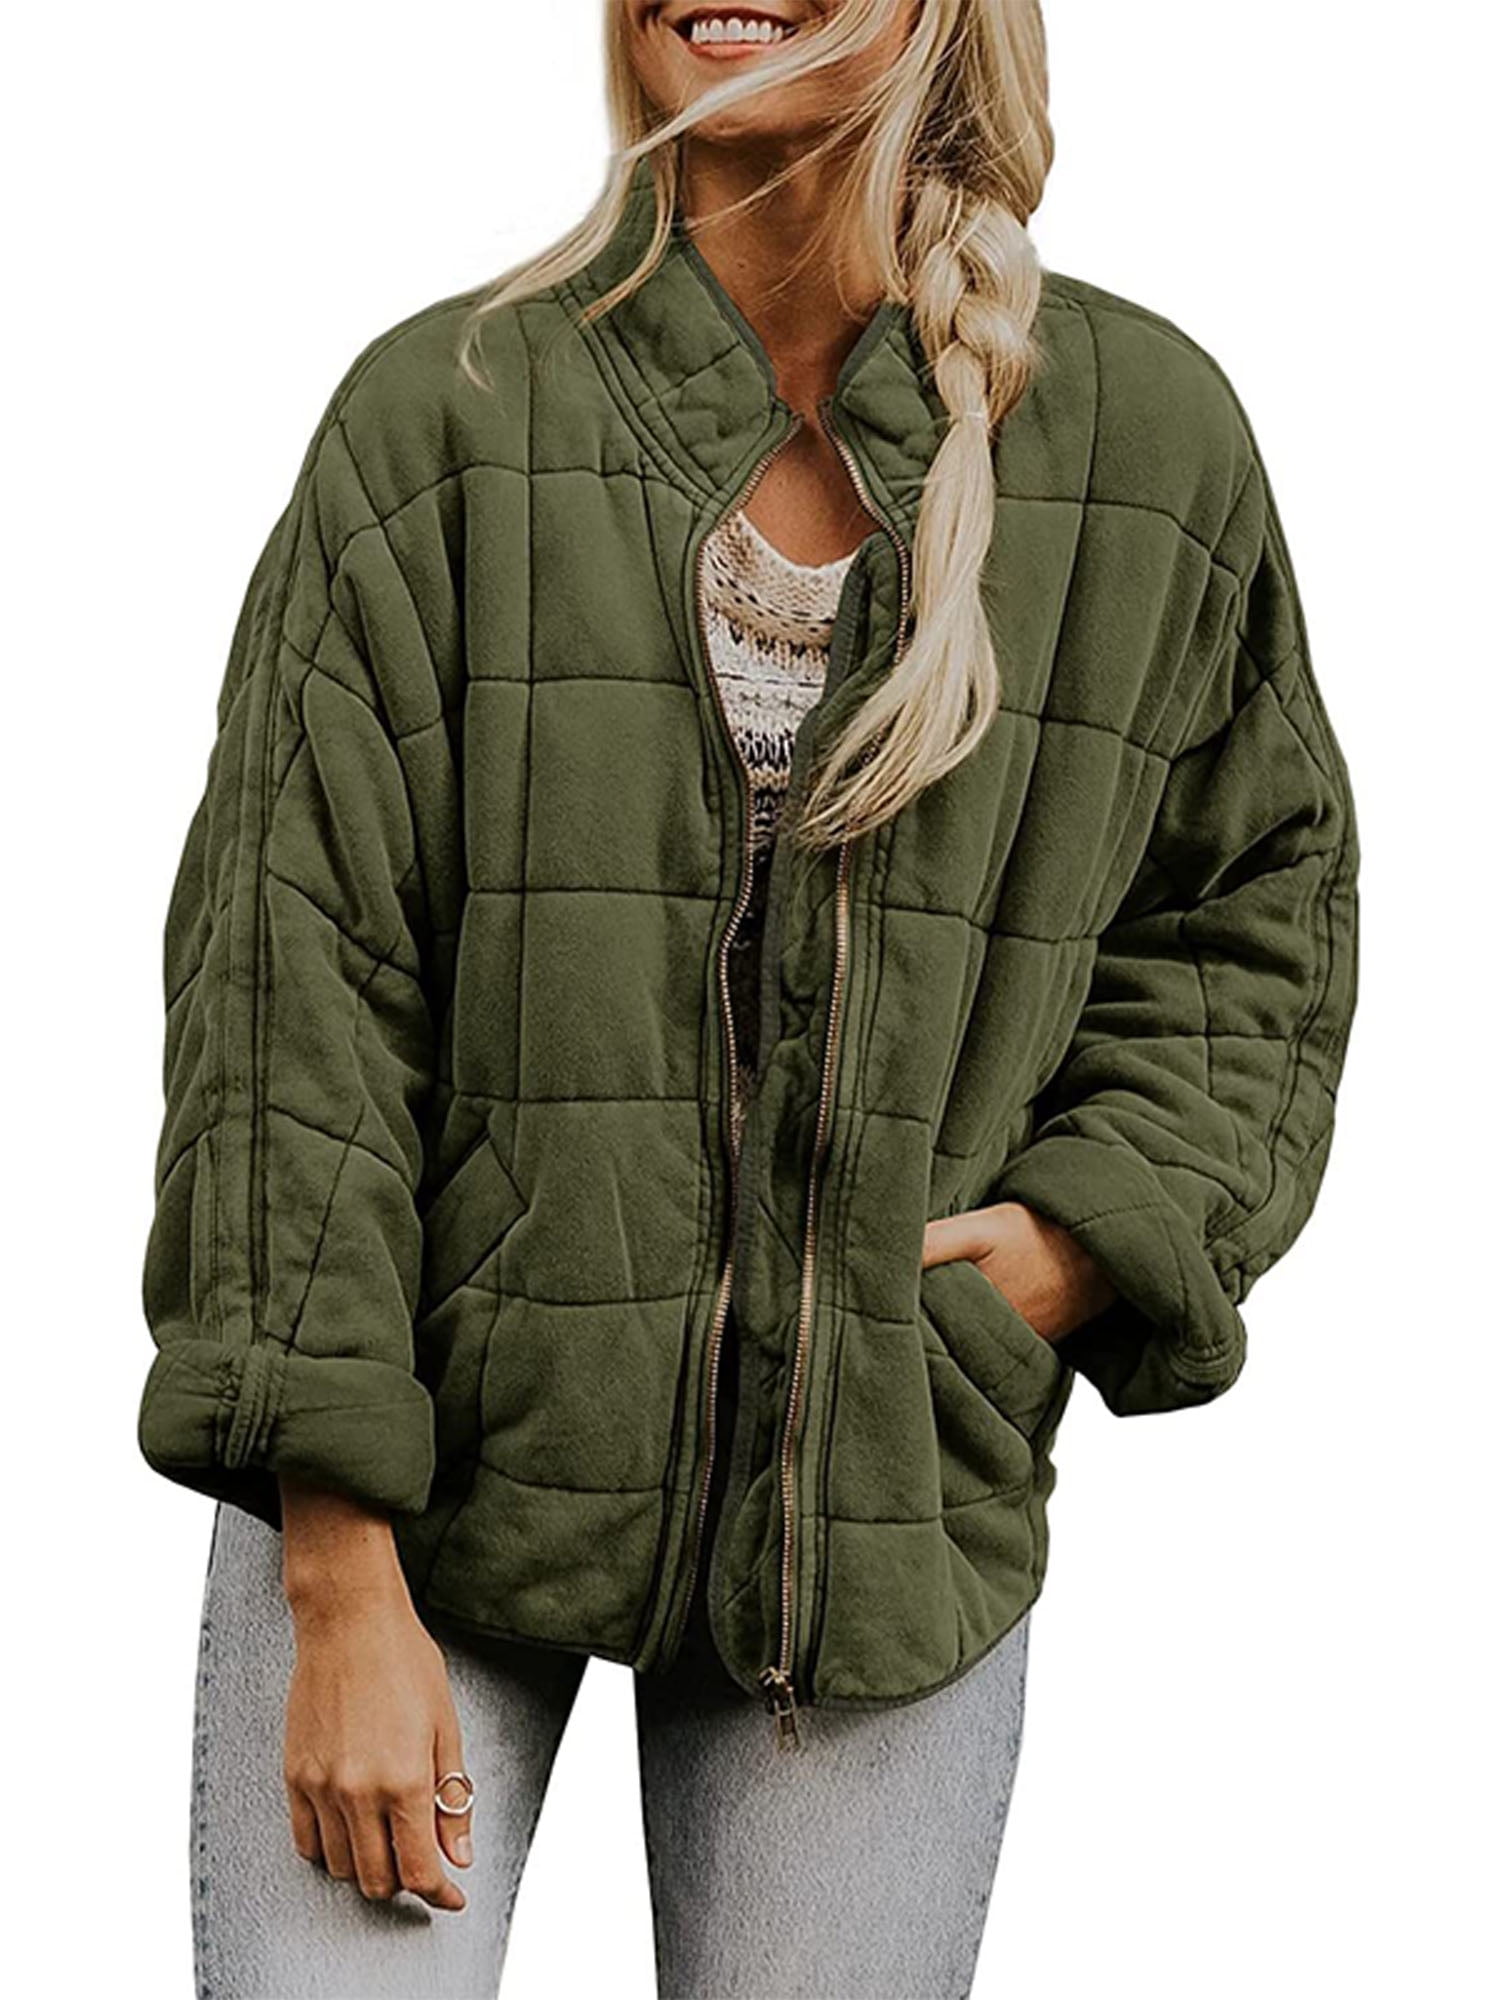 Frontwalk Womens Stylish Quilted Jacket Winter Coats Outwear Solid Color  Lightweight Padded Jacket with Pockets Fashion Coat